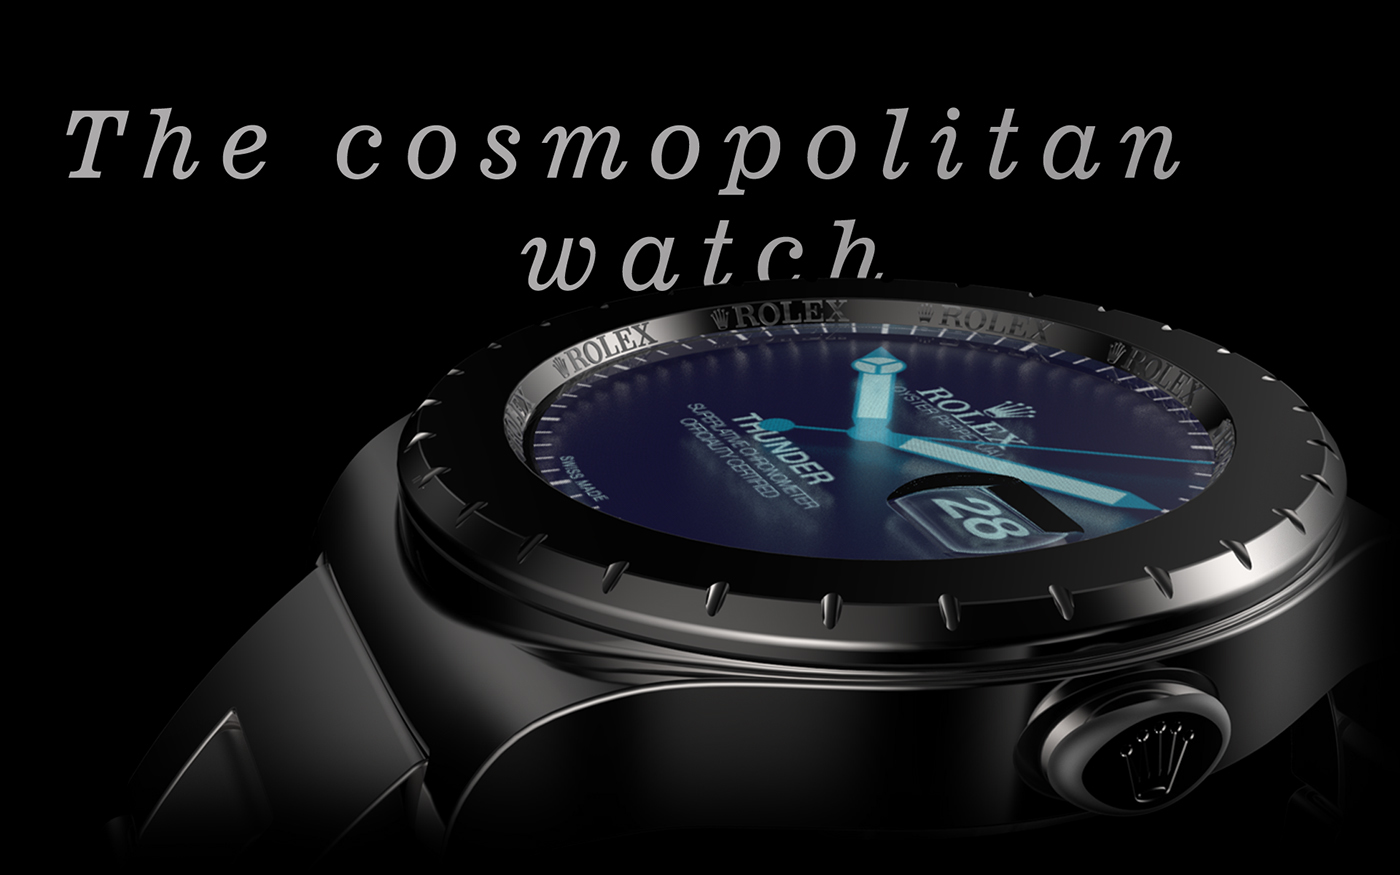 smartwatch watch rolex product user Interface Experience industrial concept study